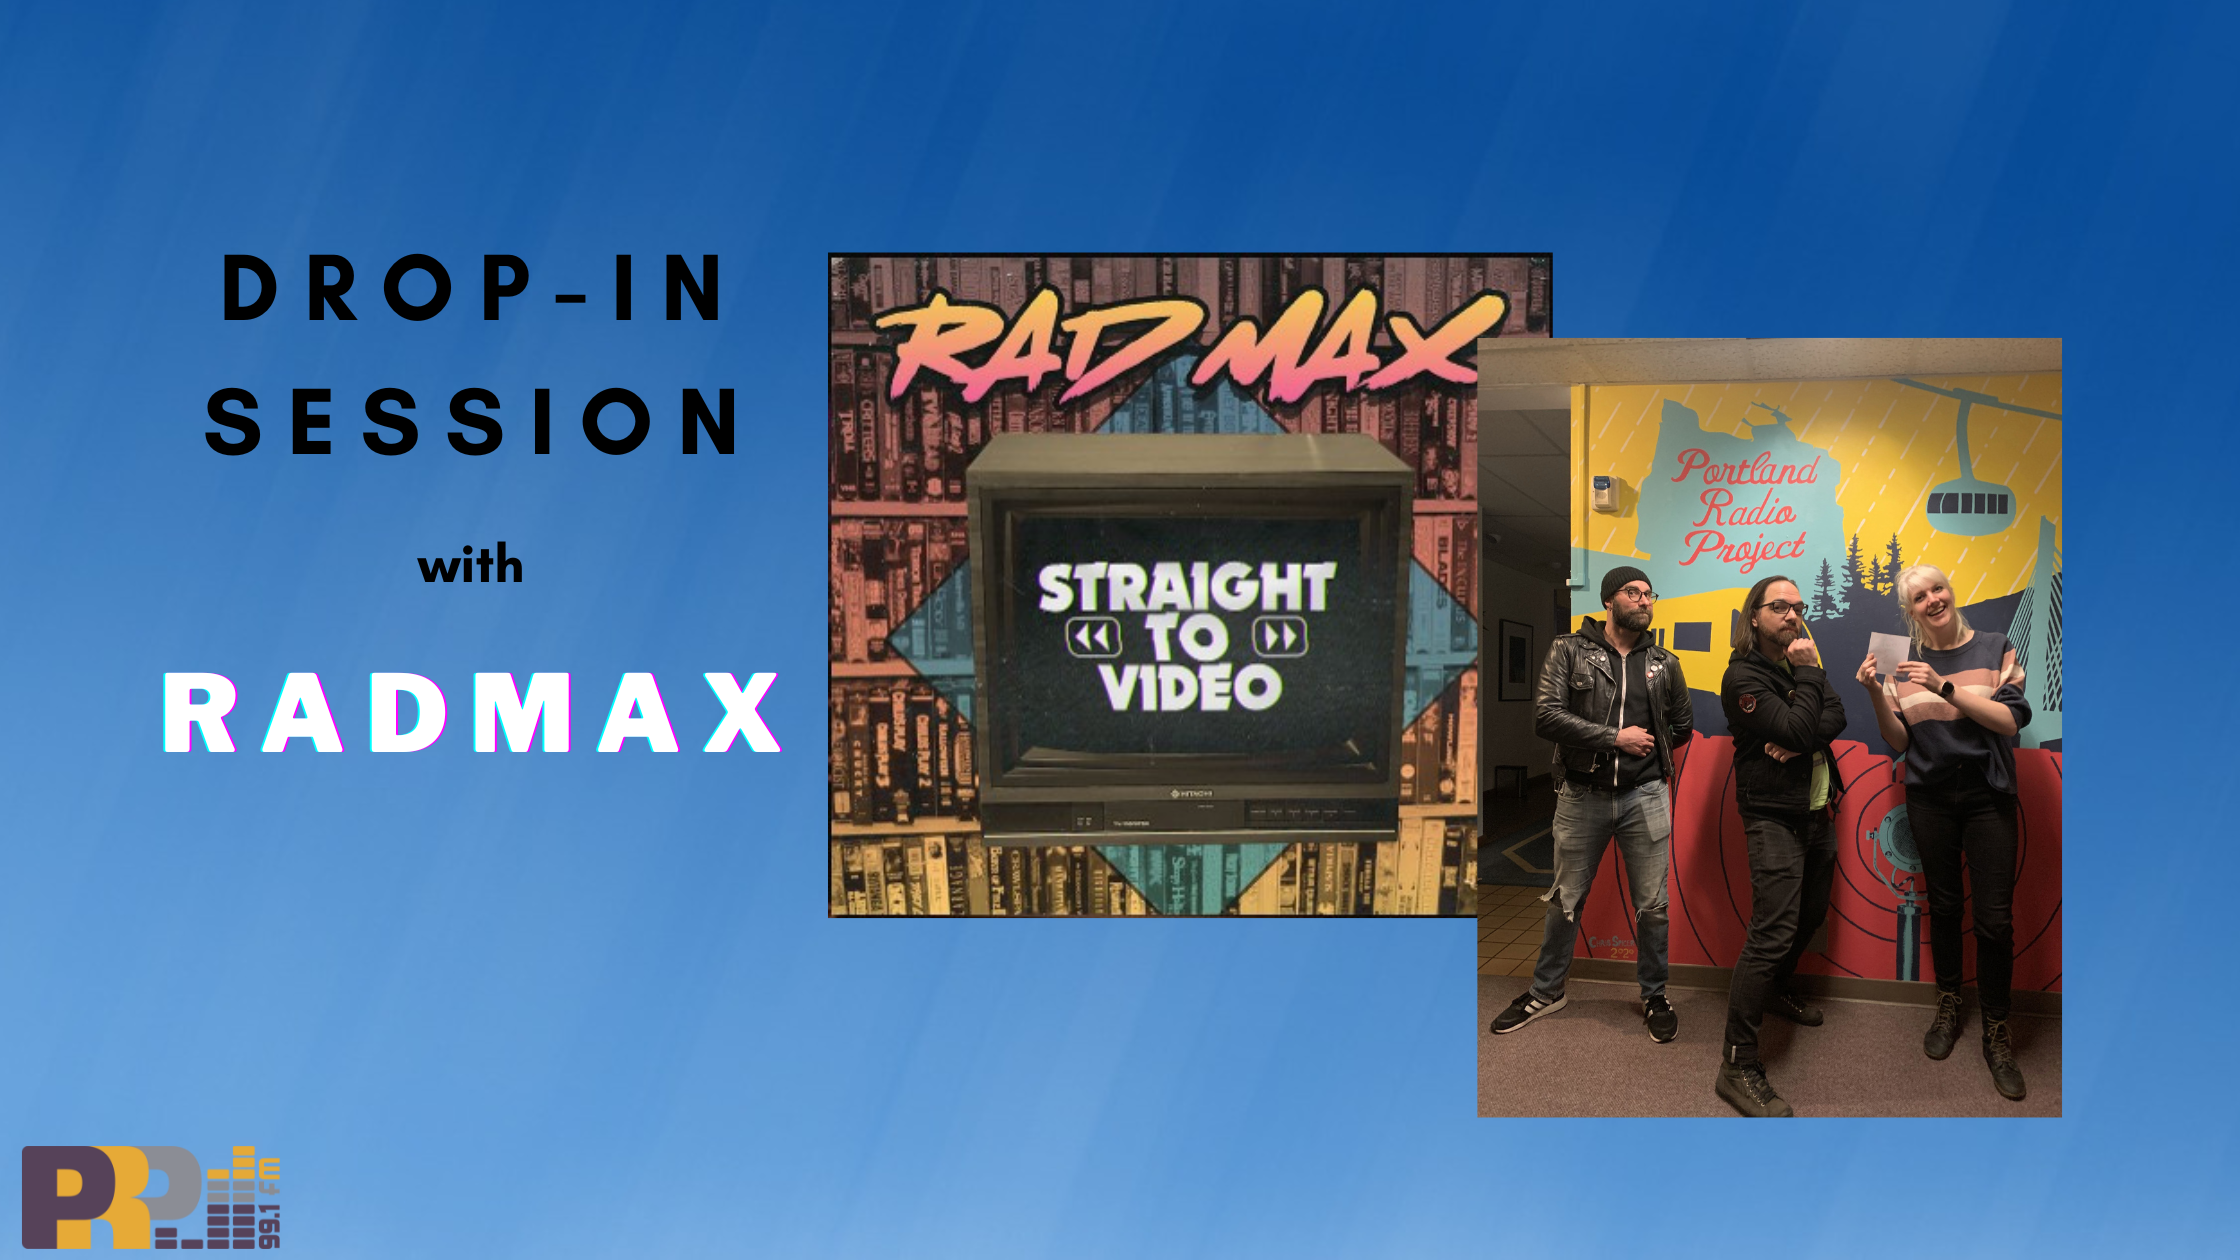 Drop-in Session with Rad Max